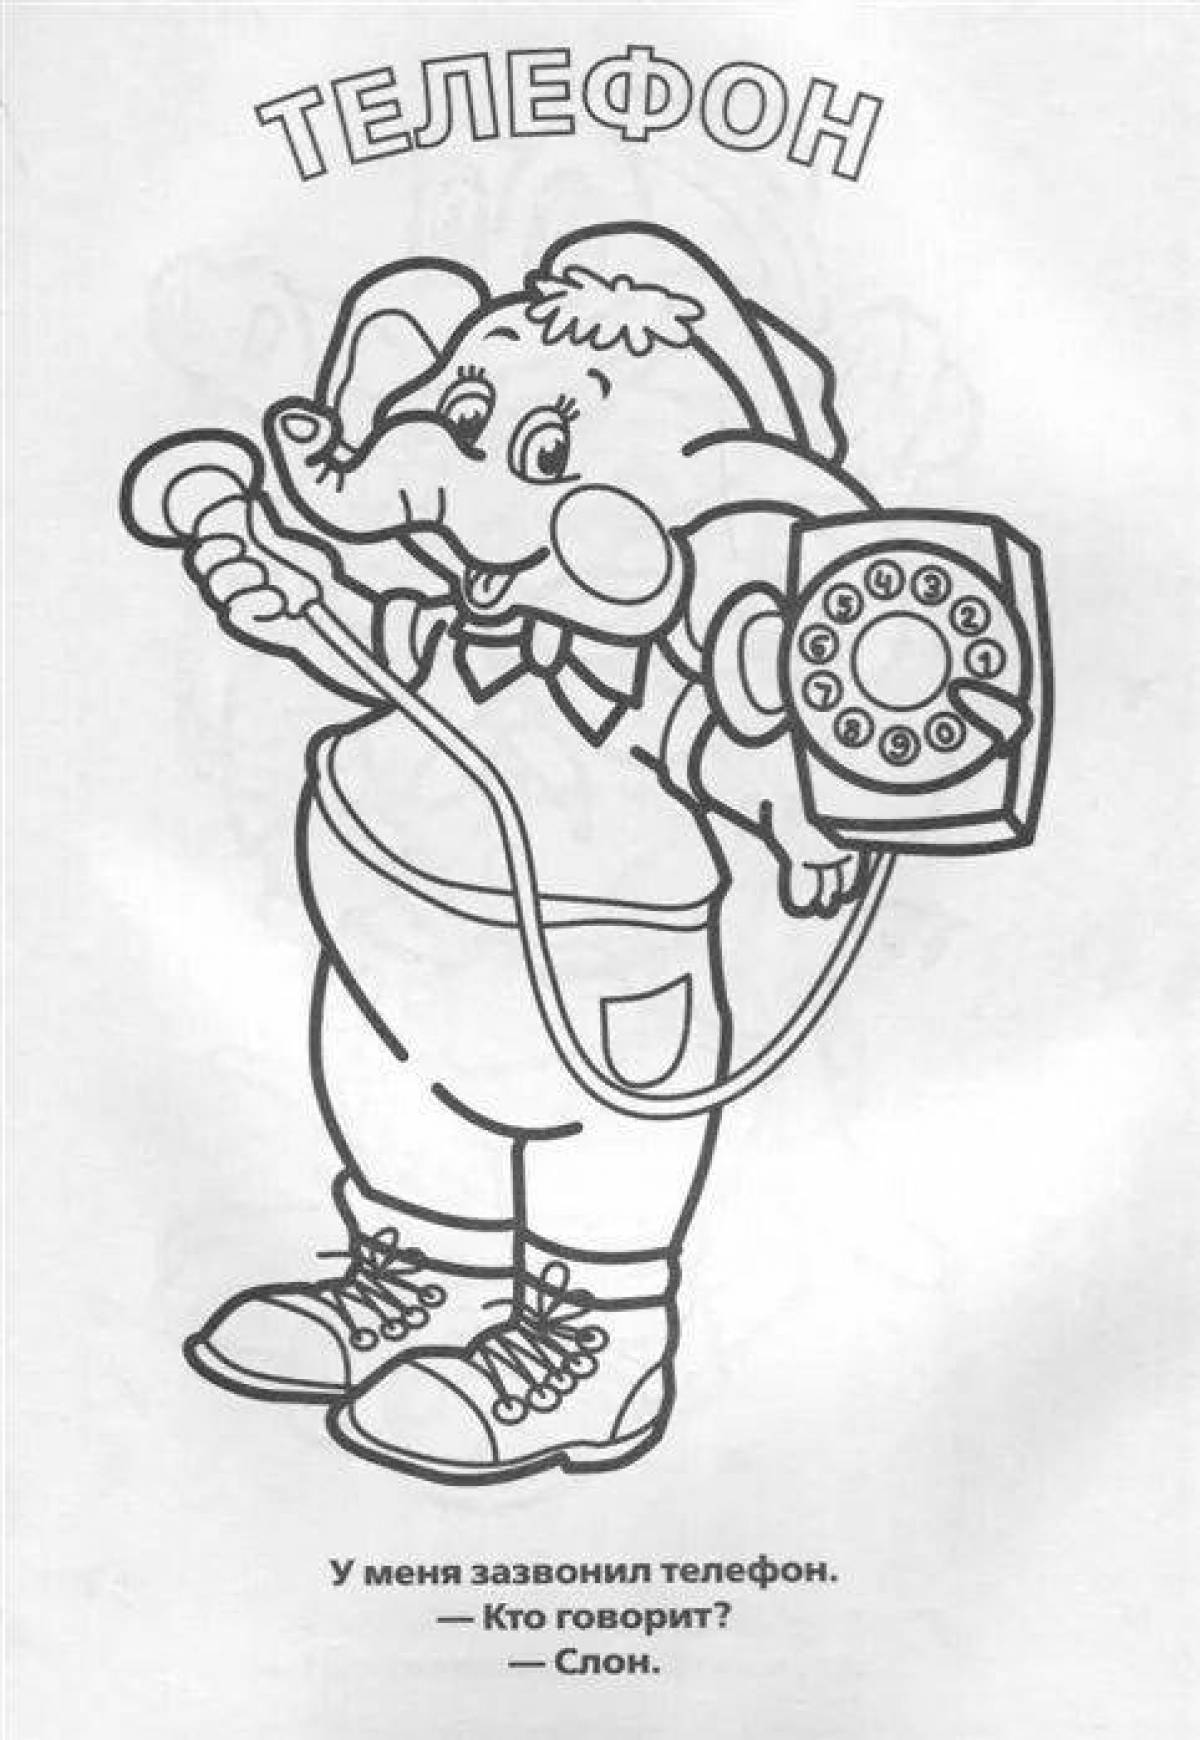 Chukovsky's colorful phone coloring page